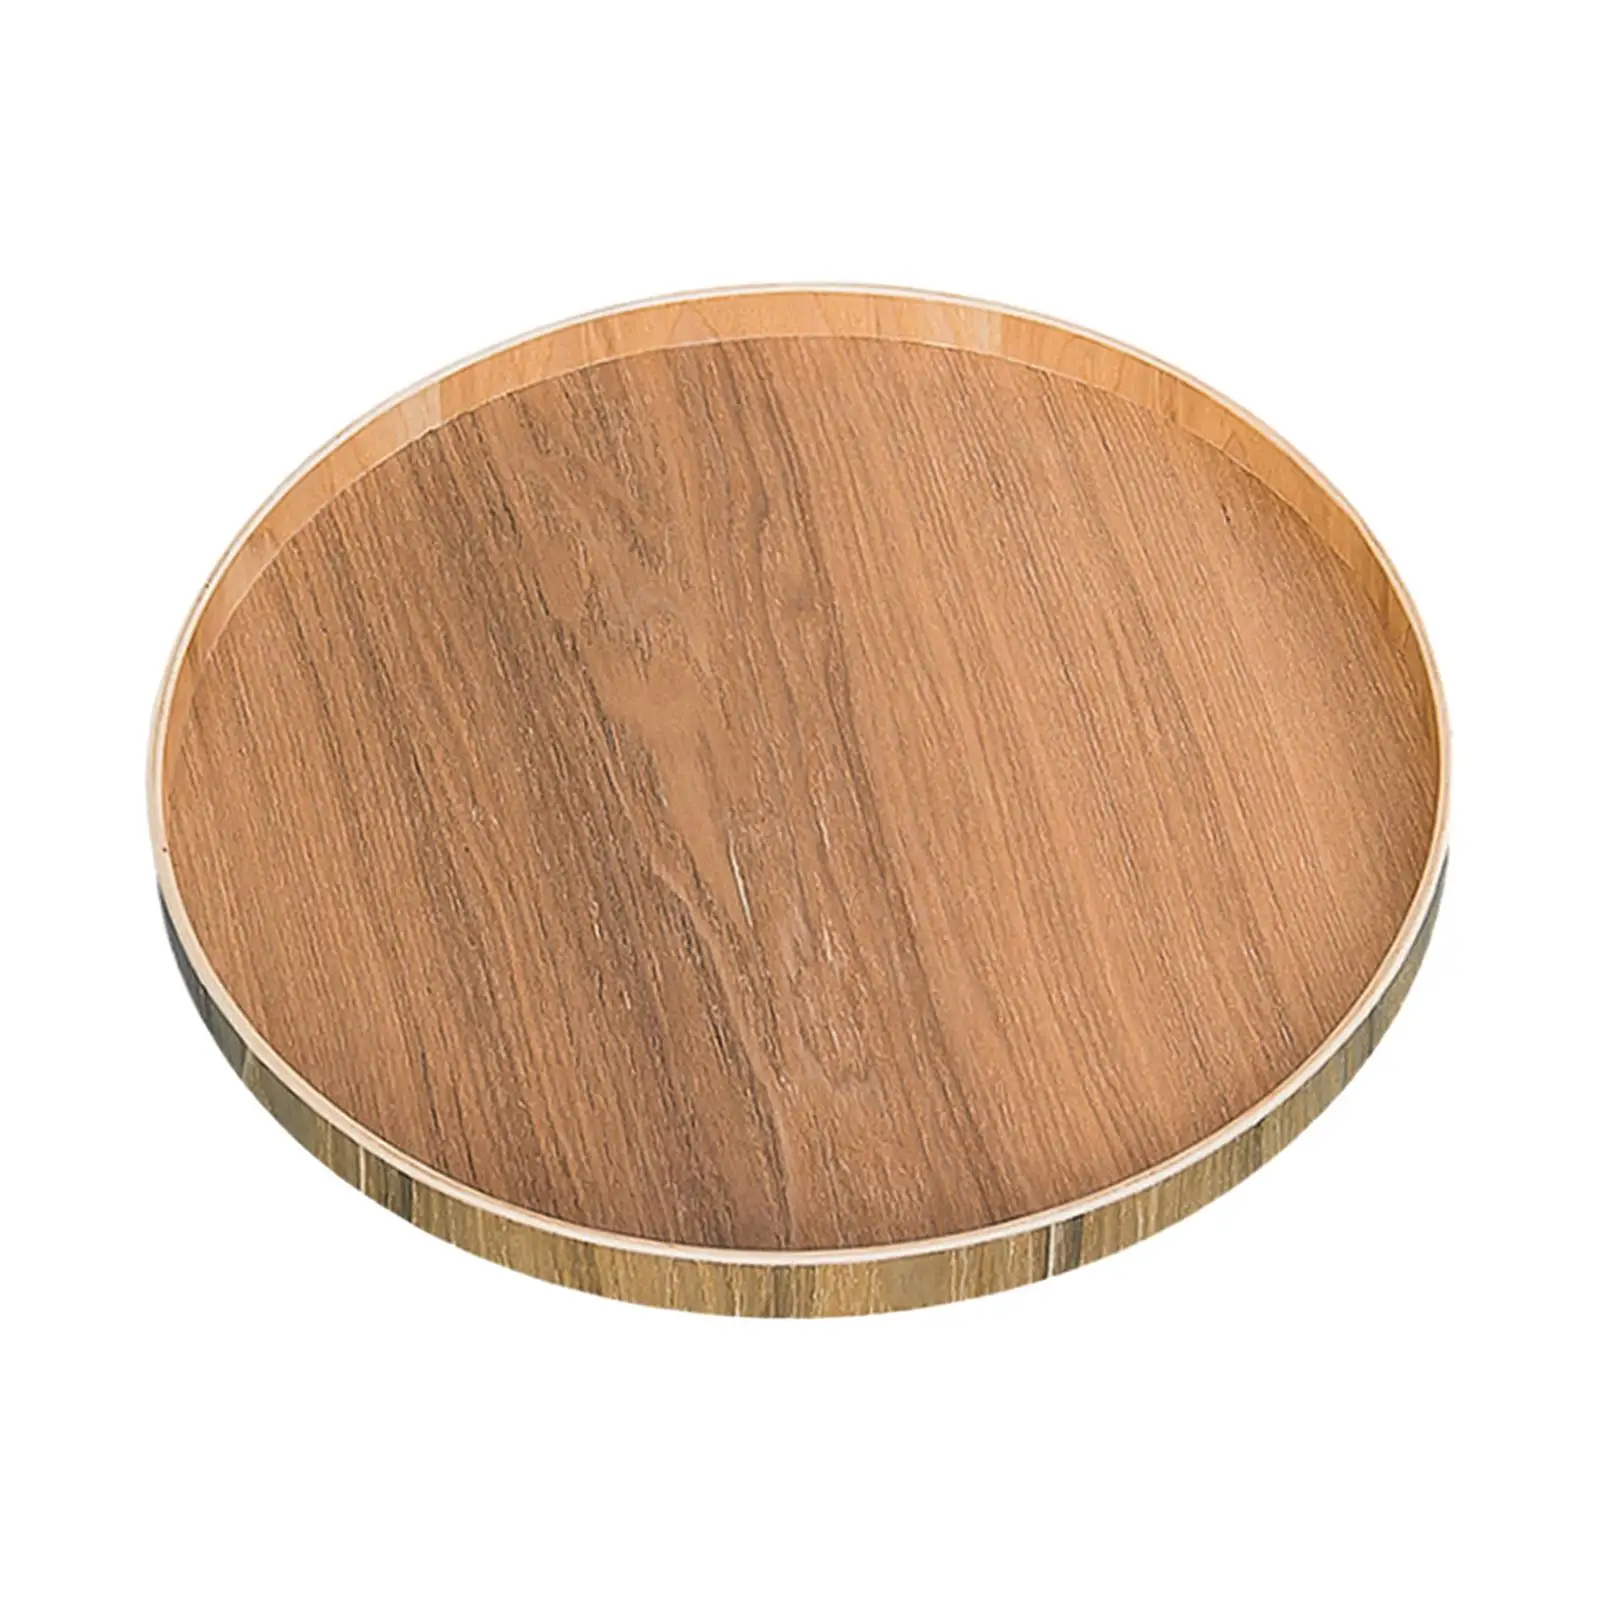 Wooden Serving Plate Dessert Tray Appetizer Organizer for Table Centerpiece Pantry Kitchen Countertop Cabinet Dining Table